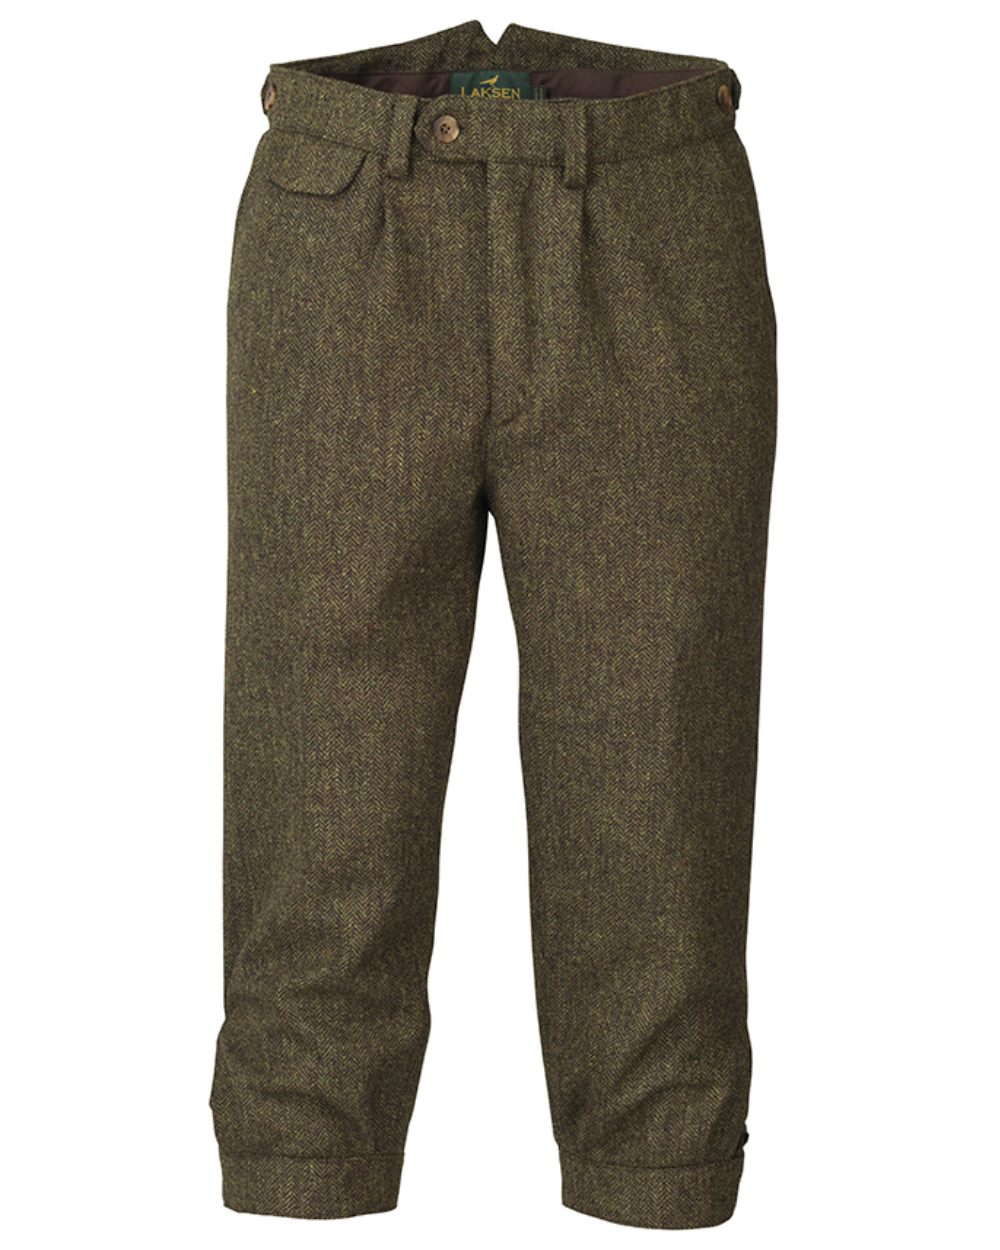 Laksen Kirkton Tweed Breeks With CTX On A White Background